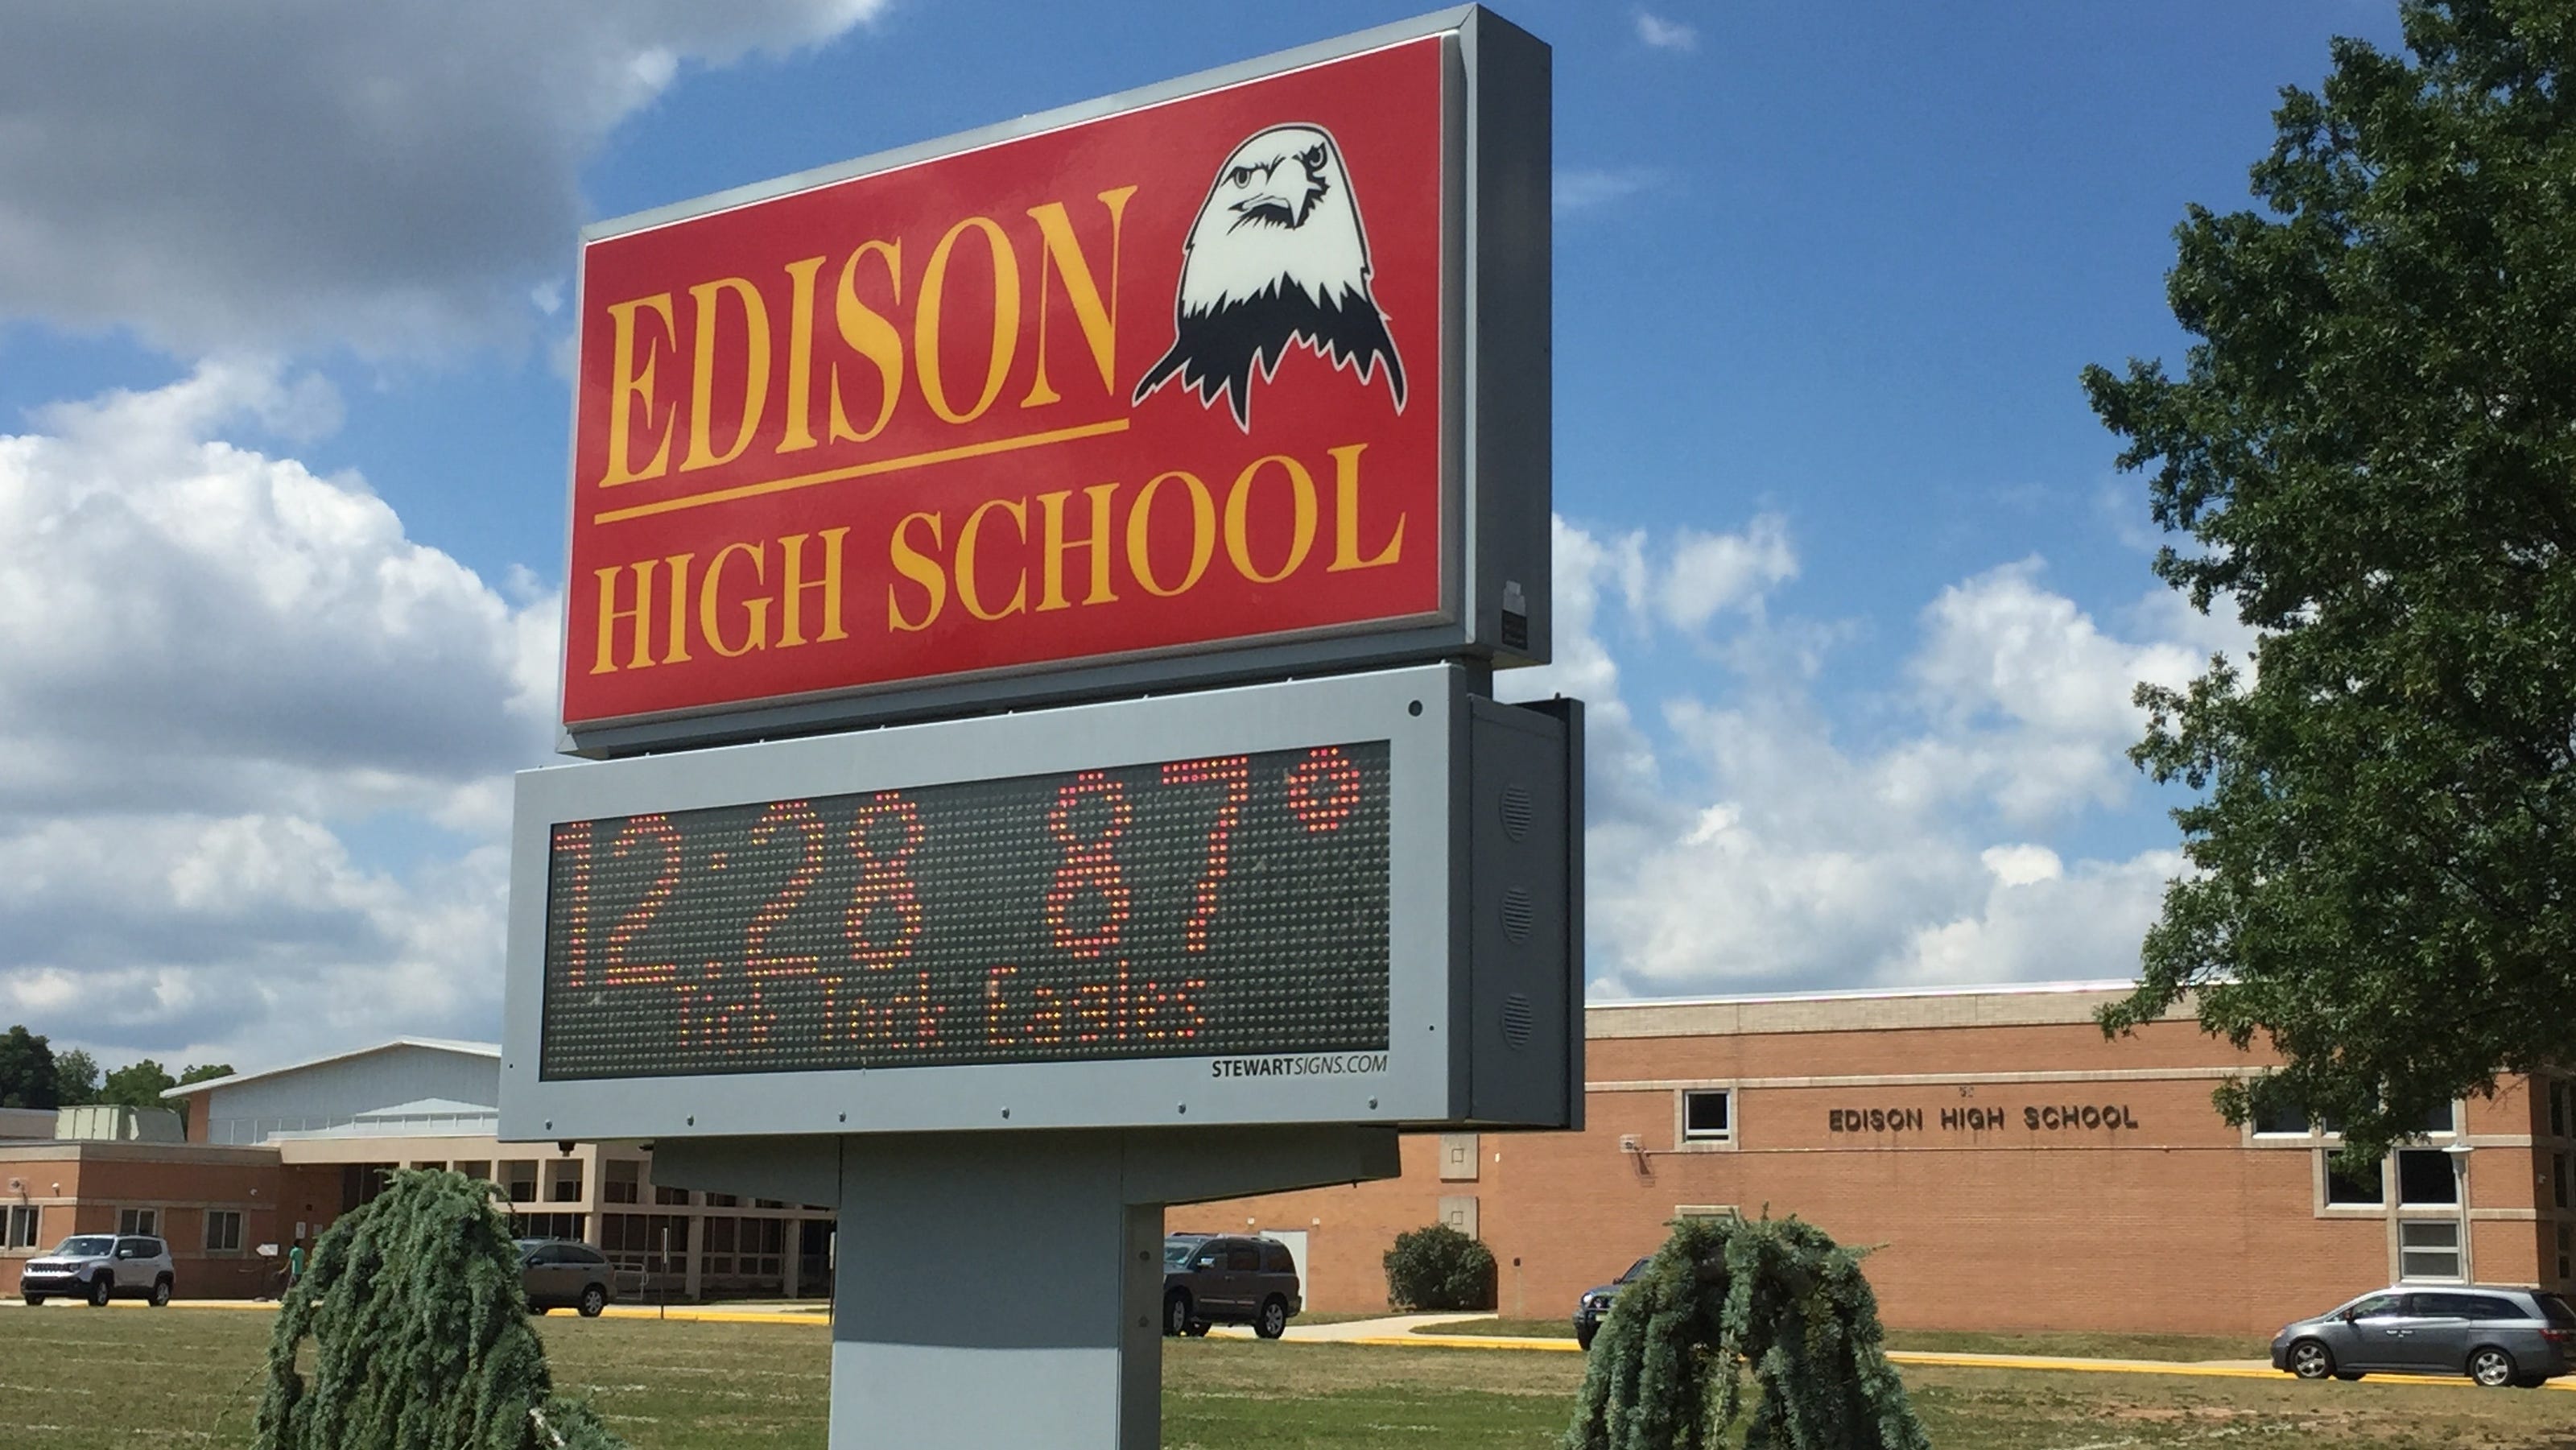 edison-township-nj-public-schools-sued-over-sex-abuse-in-the-1980s